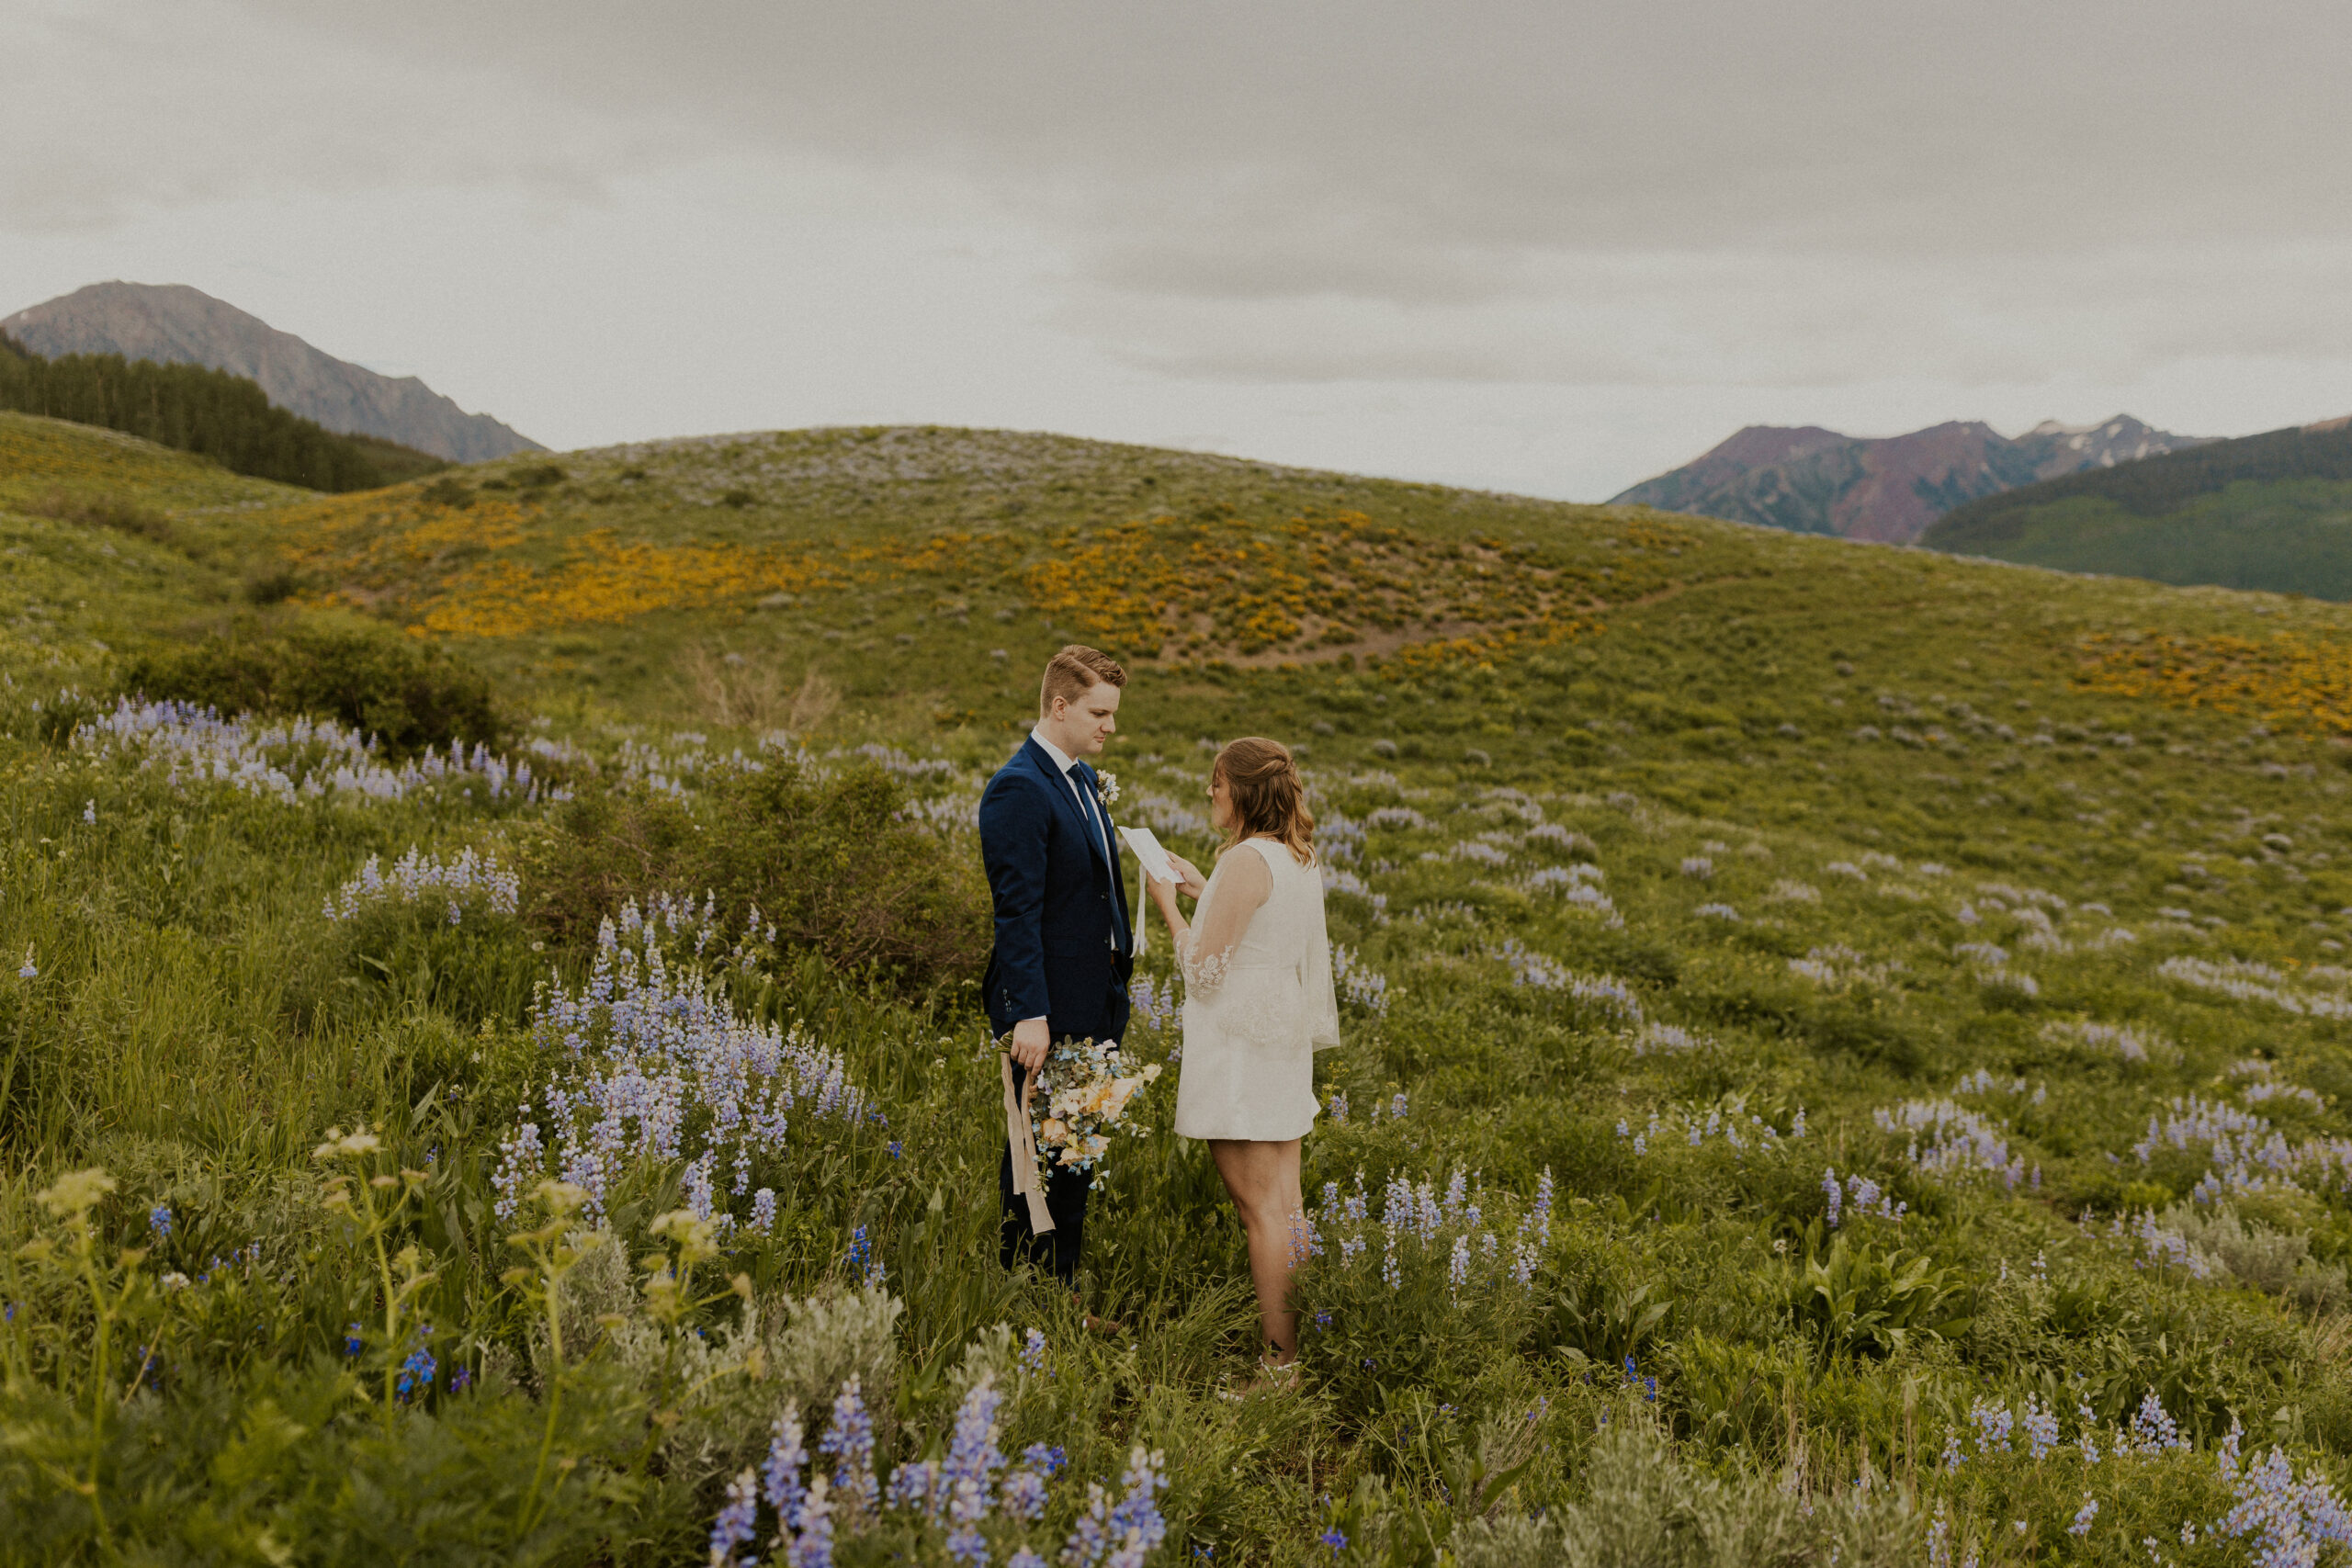 Intimate elopemement in Crested Butte, Colorado wildflowers